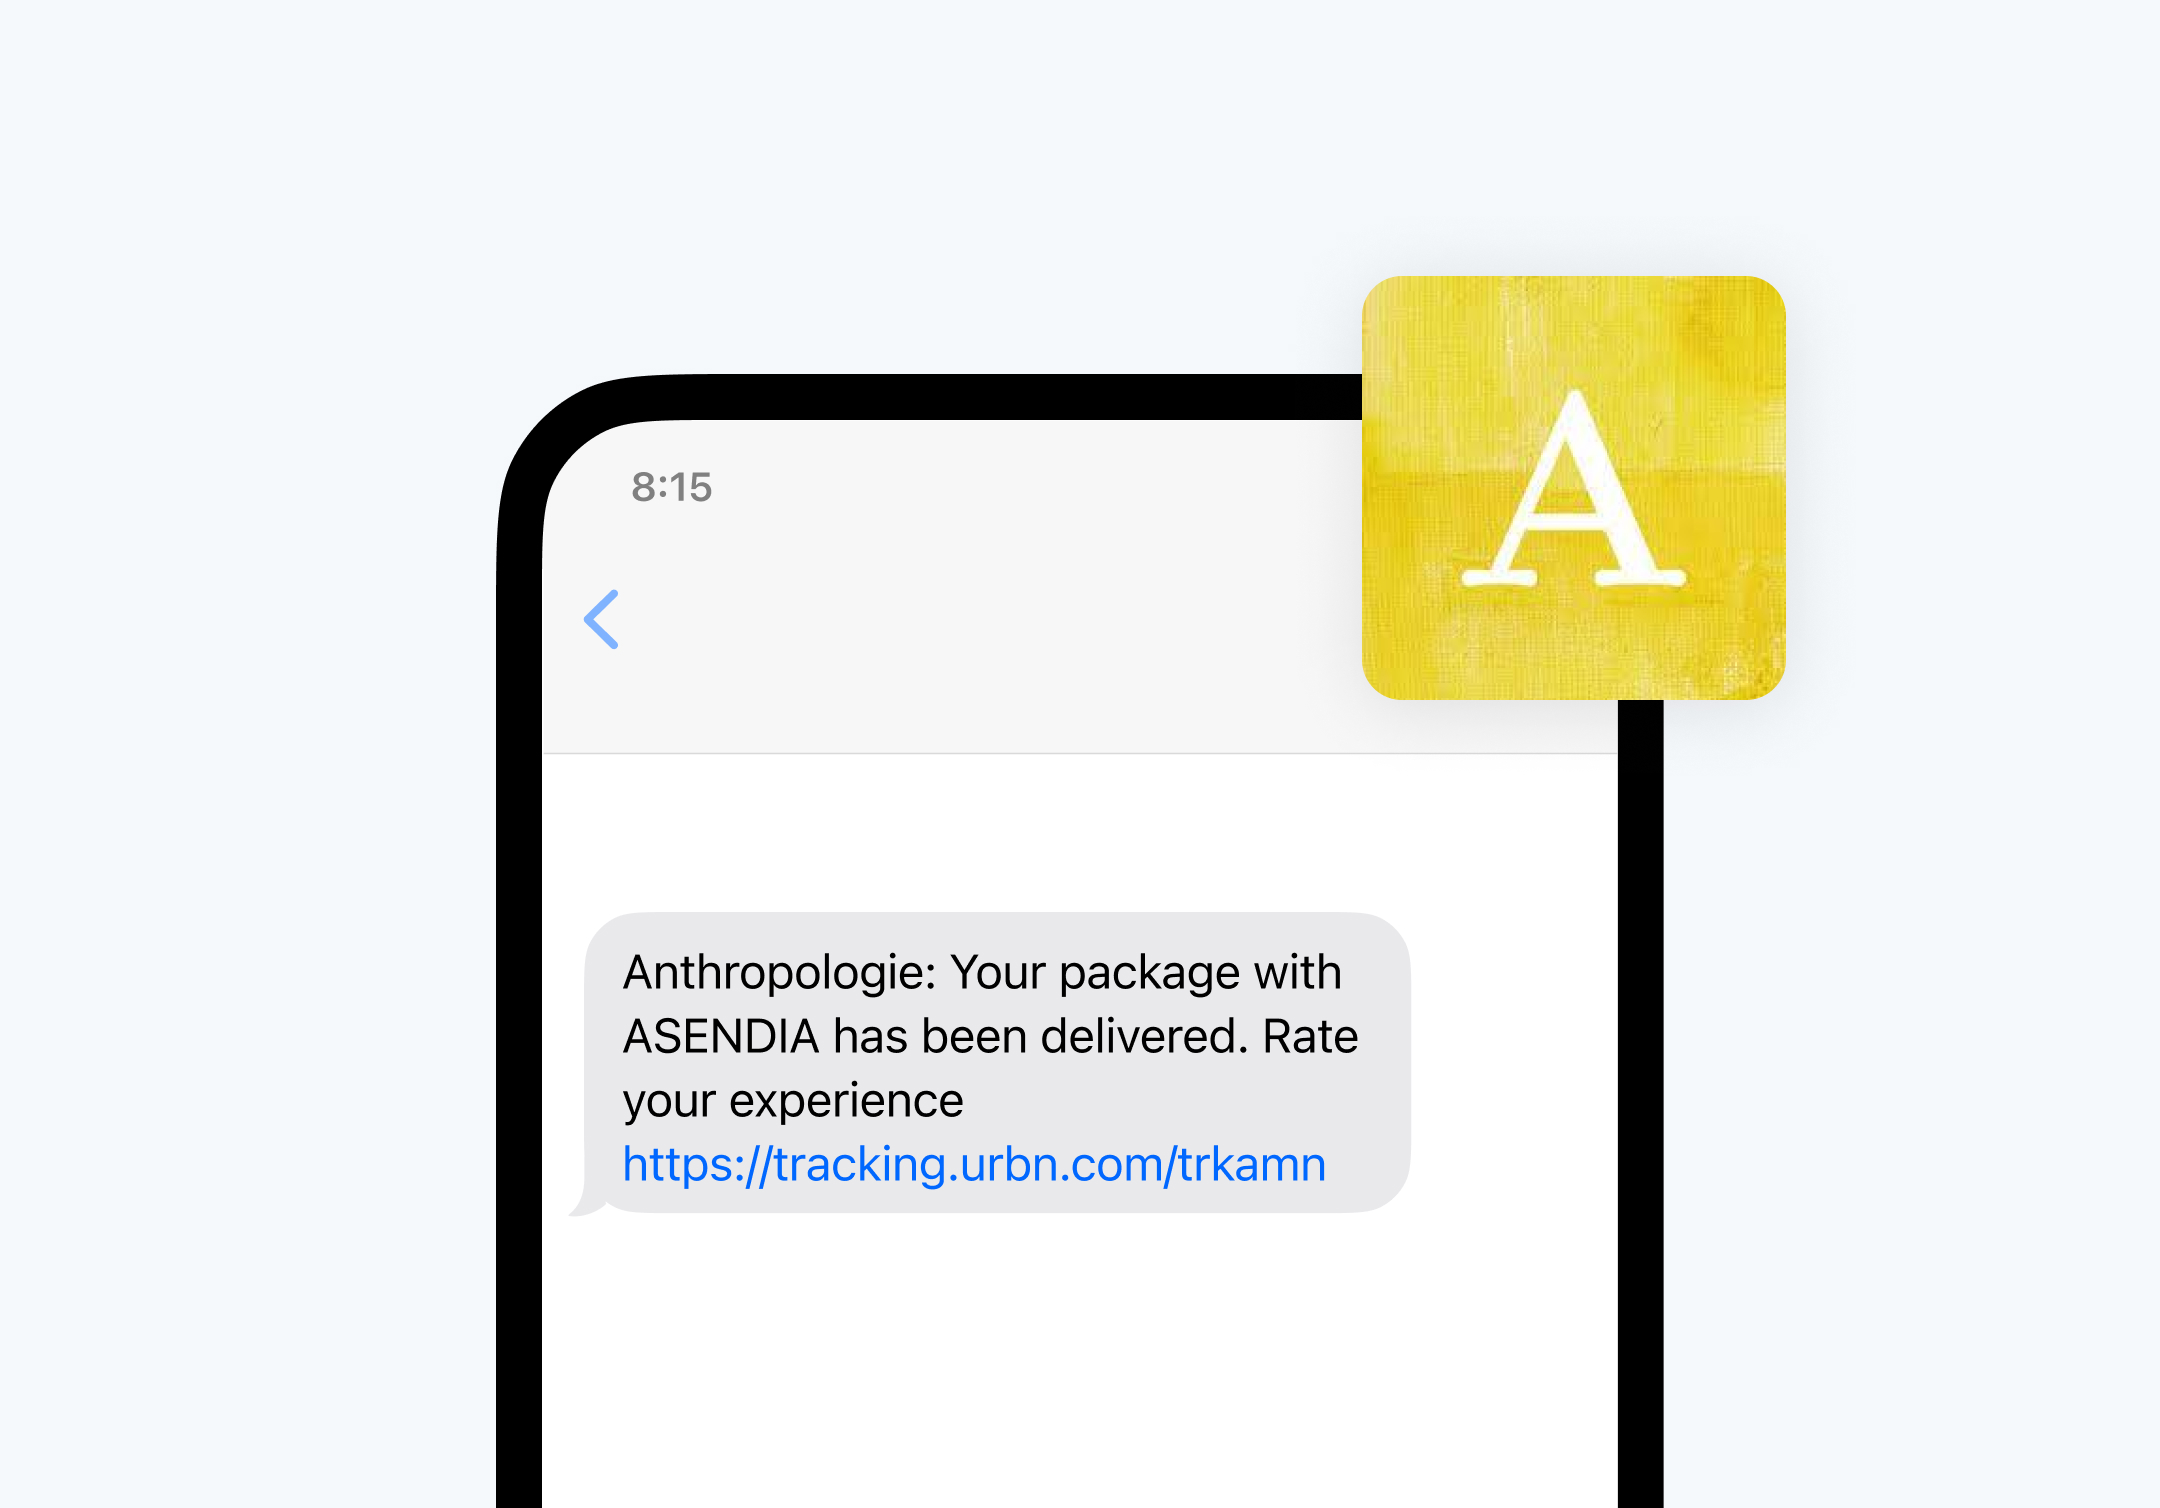 A smartphone text message from Anthropologie notifying the recipient that their package has been delivered and providing a link to rate the experience, illustrating a customer service aspect of text subscription services.